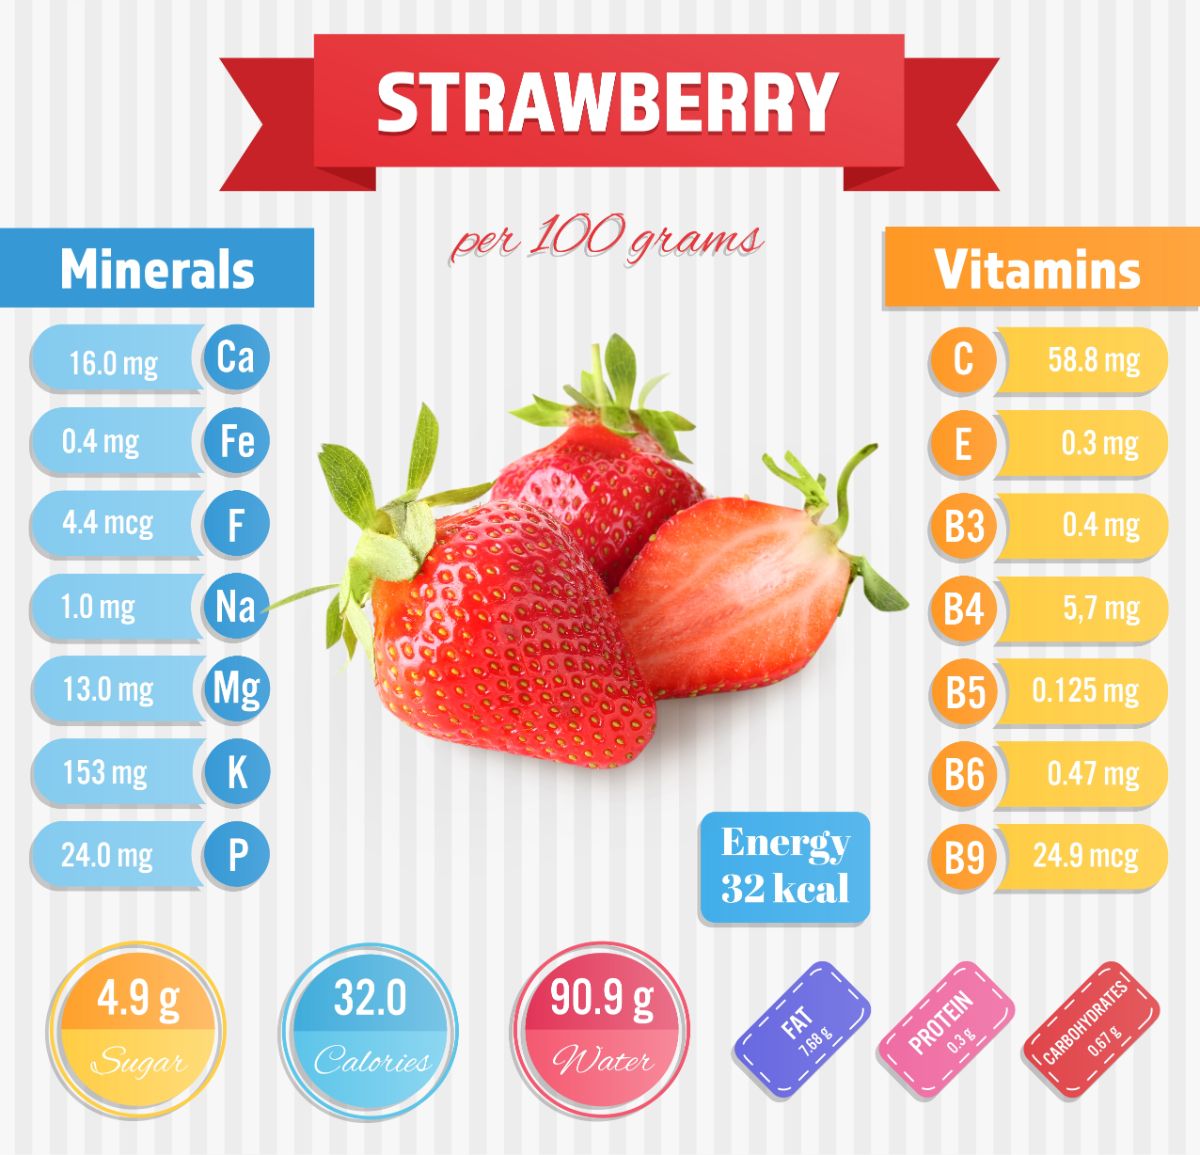 https://strawberryplants.org/wp-content/uploads/A-Look-at-the-Nutritional-Value-and-Benefits-4.jpg